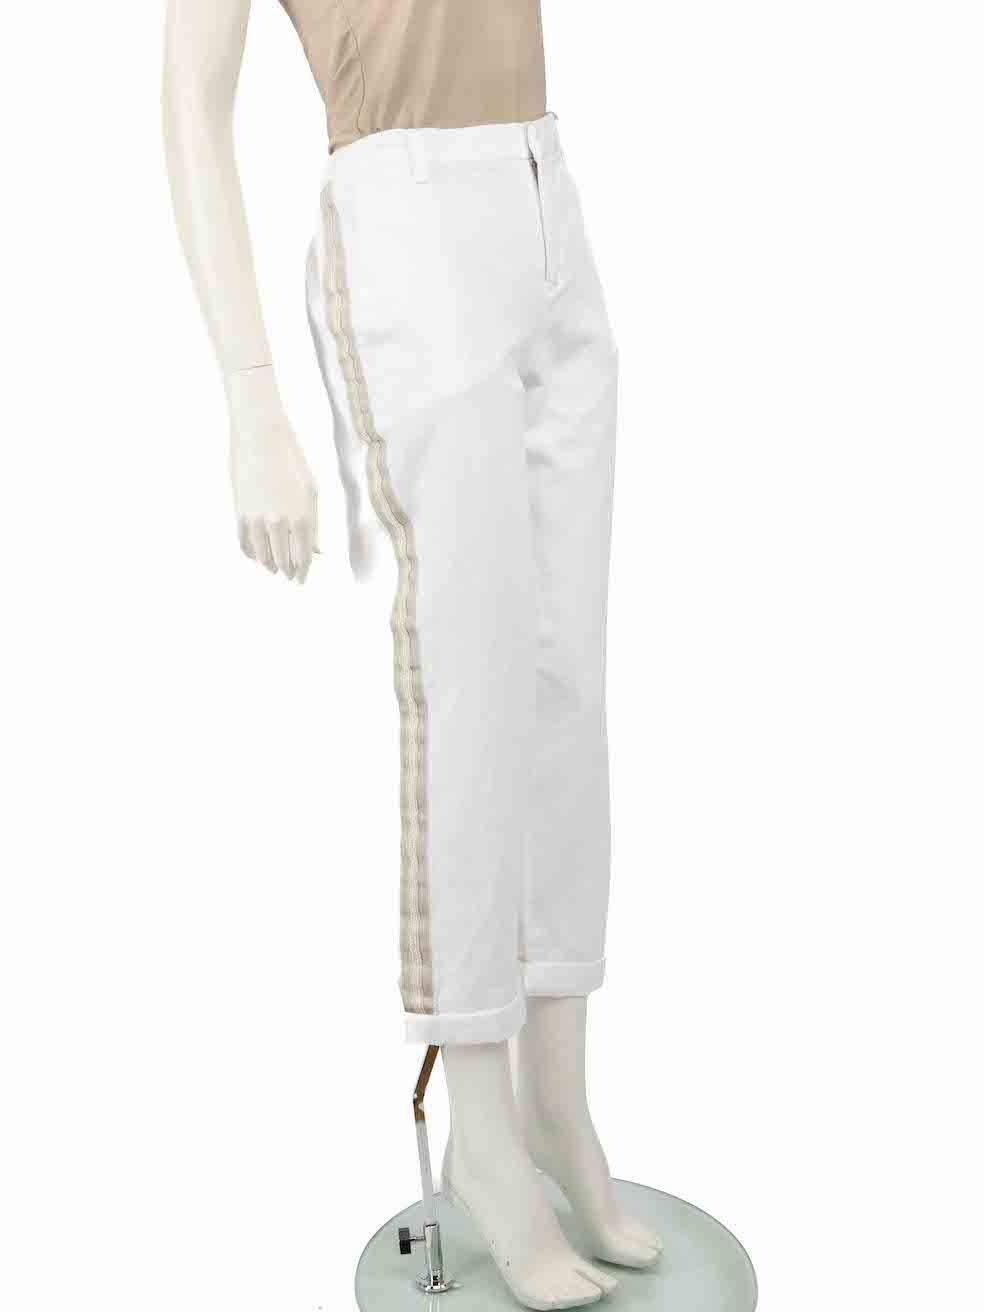 CONDITION is Never worn, with tags, however discolouration can be seen on this new Zadig & Voltaire designer resale item near the bottom of the right leg due to poor storage.
 
 
 
 Details
 
 
 White
 
 Cotton
 
 Trousers
 
 Straight leg
 
 Side